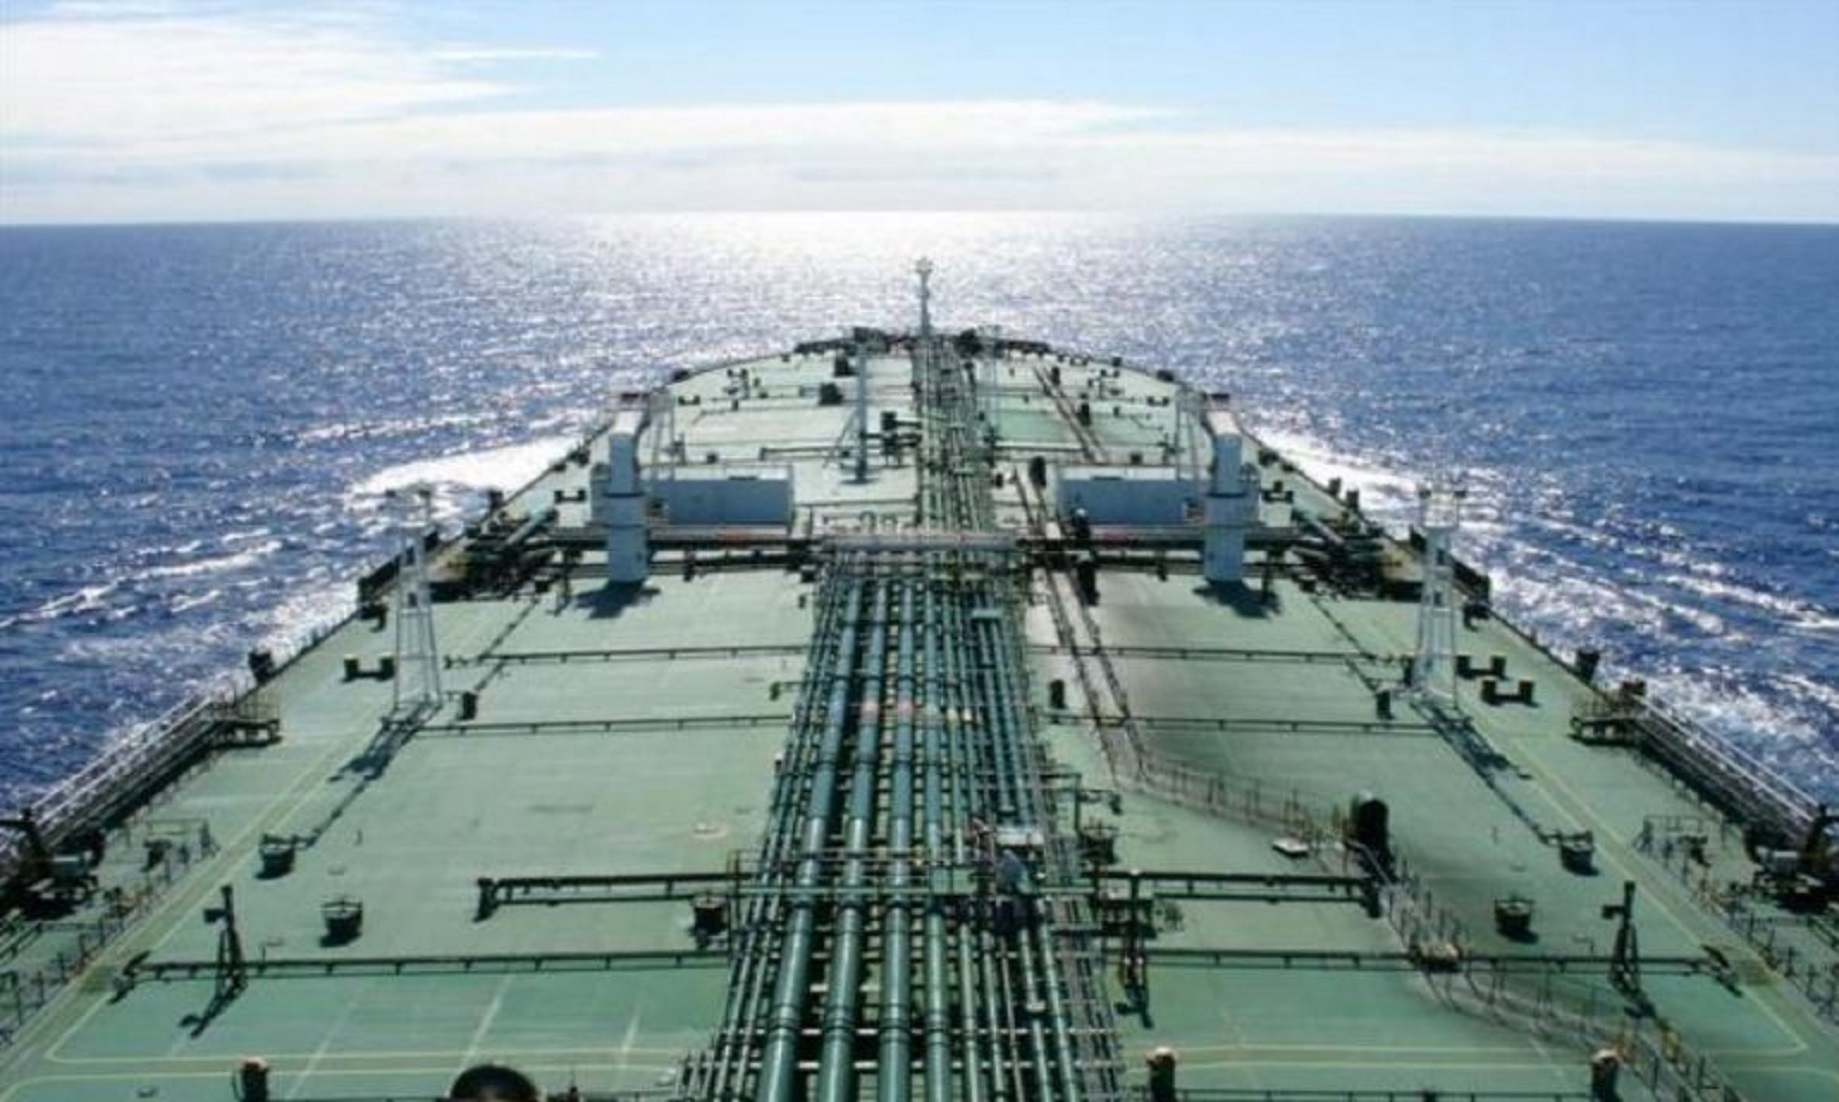 Update: Supertanker Attacked, 18 Indian Sailors Kidnapped Off Nigerian Coast